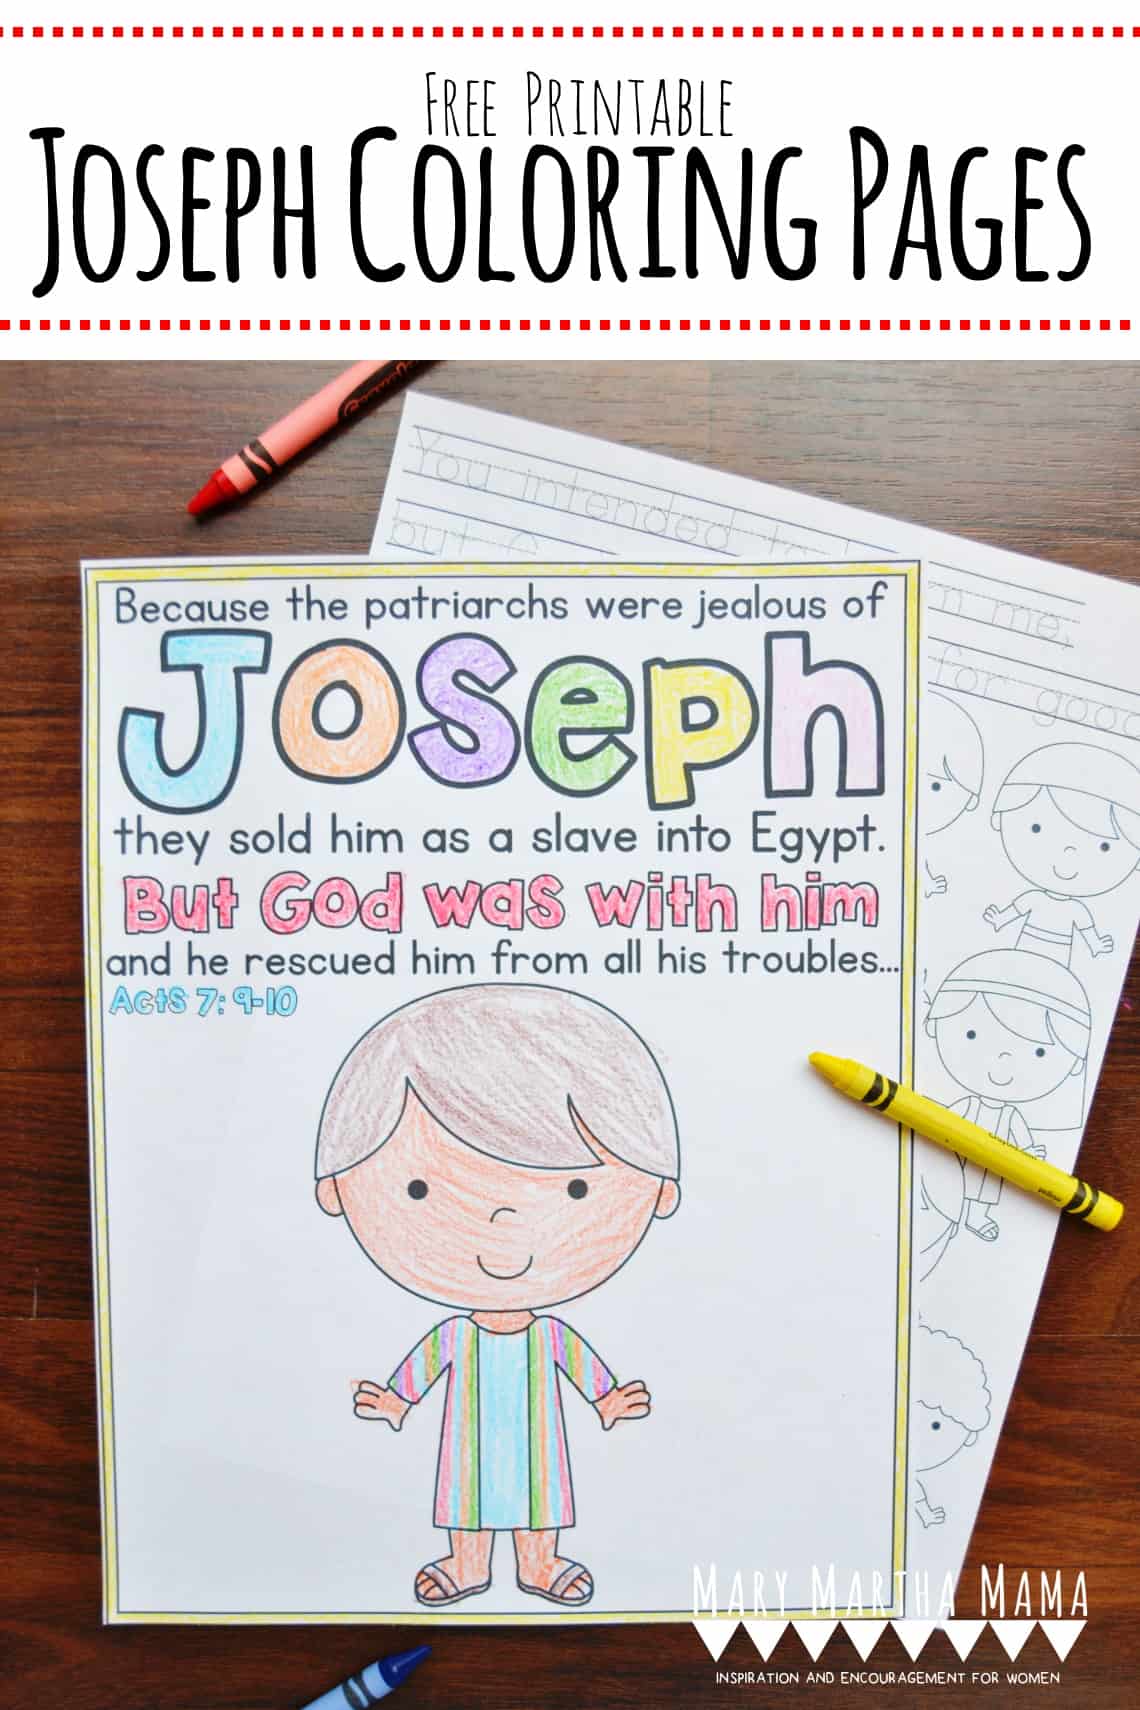 Joseph coloring pages free printables â mary martha mama